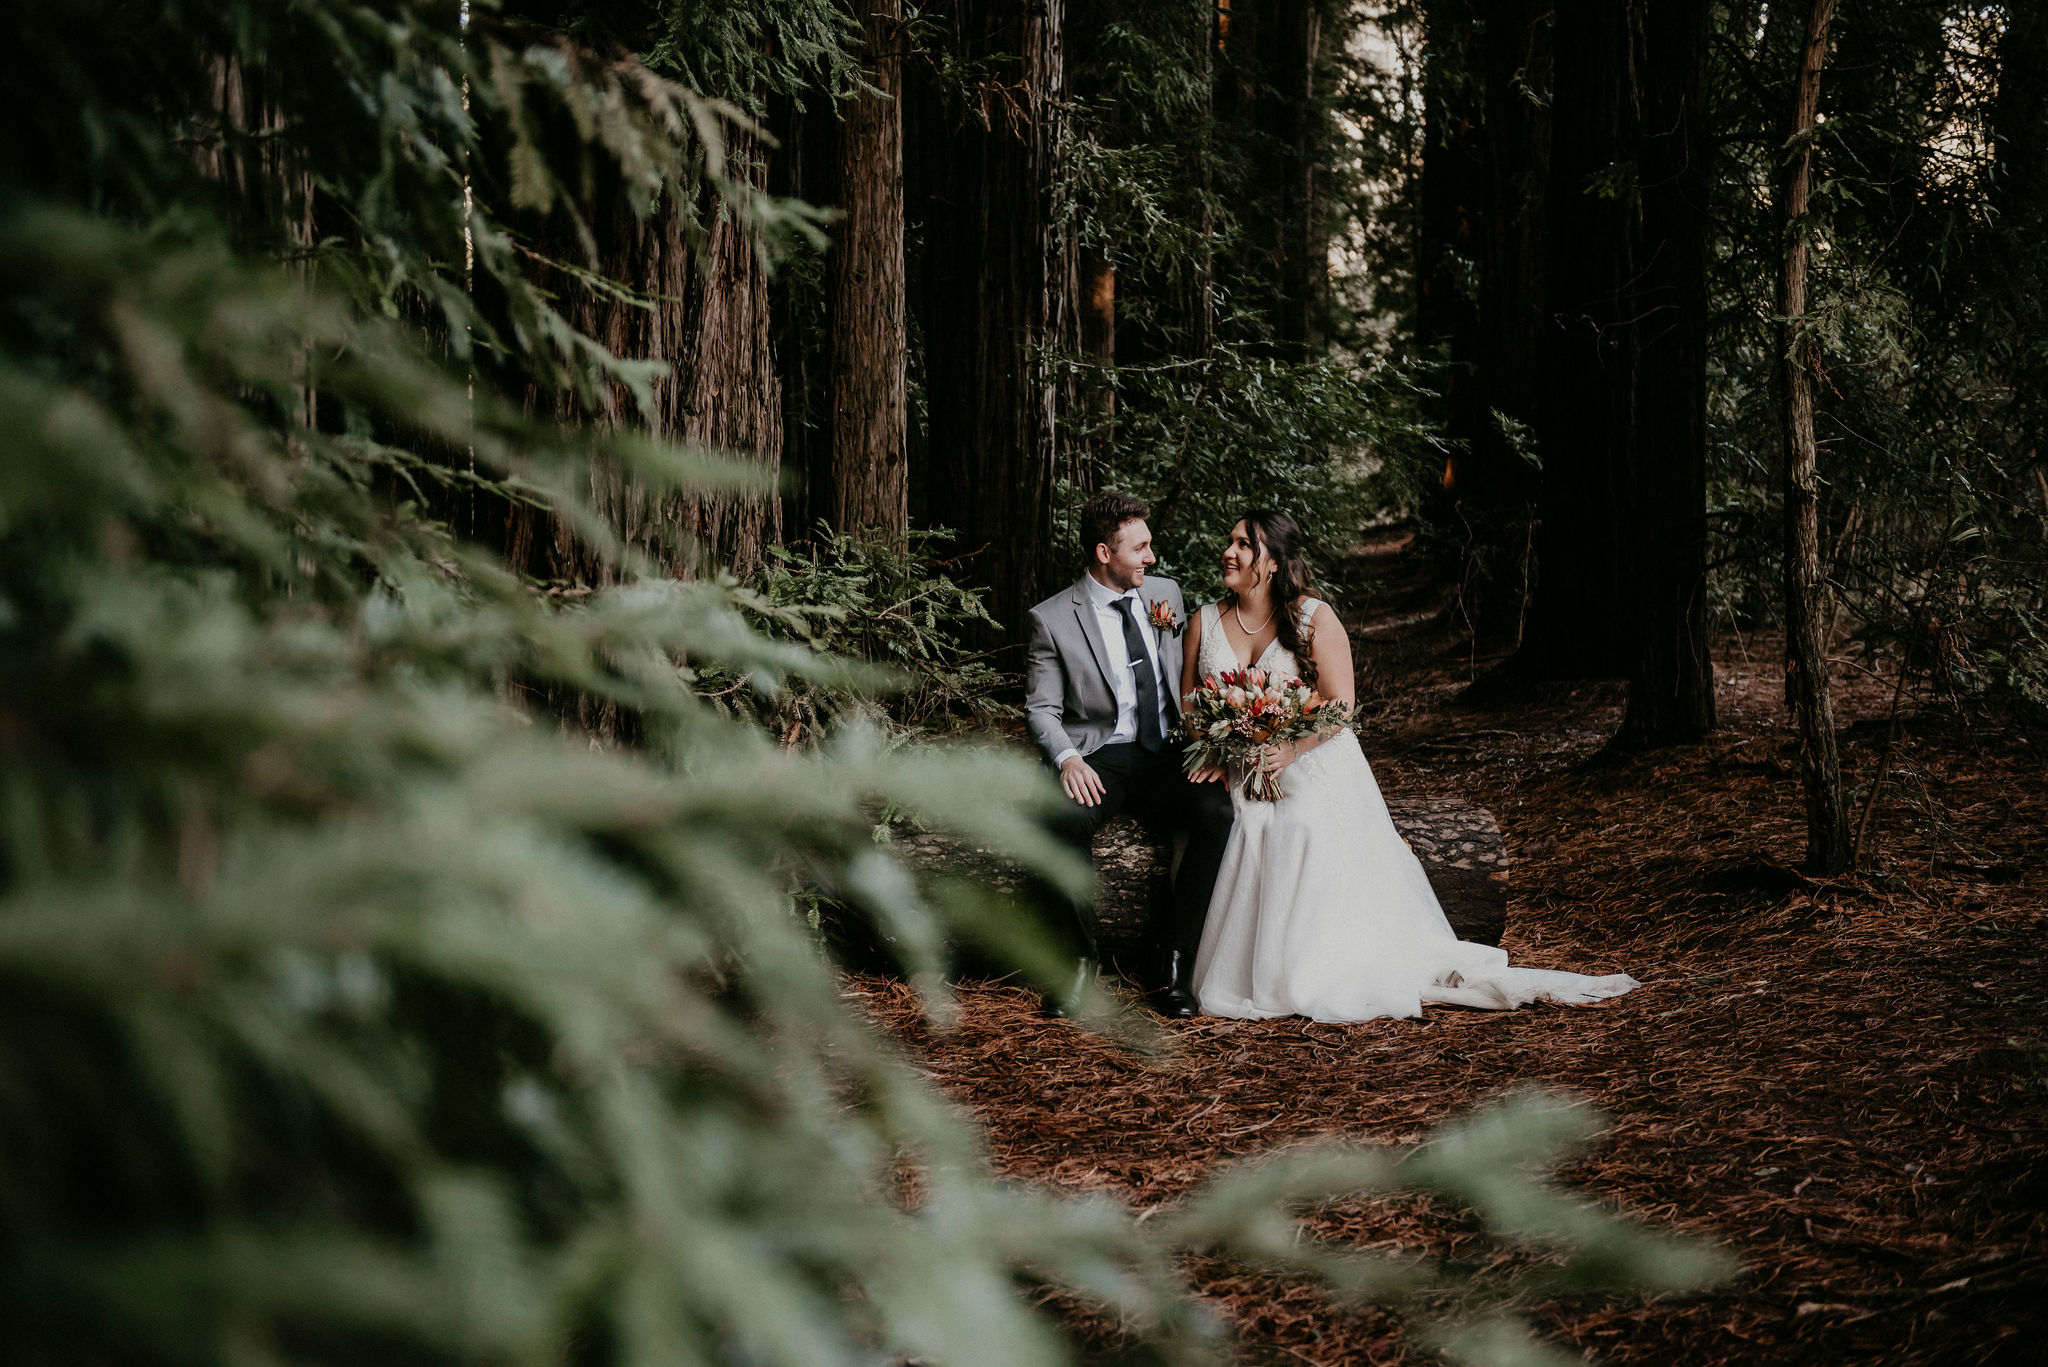 Lets-Elope-Melbourne-Celebrant-Photographer-Elopement-Package-Victoria-Sarah-Matler-Photography-Videography-Video-Warburton-Redwood-Forest-weddings-intimate-19